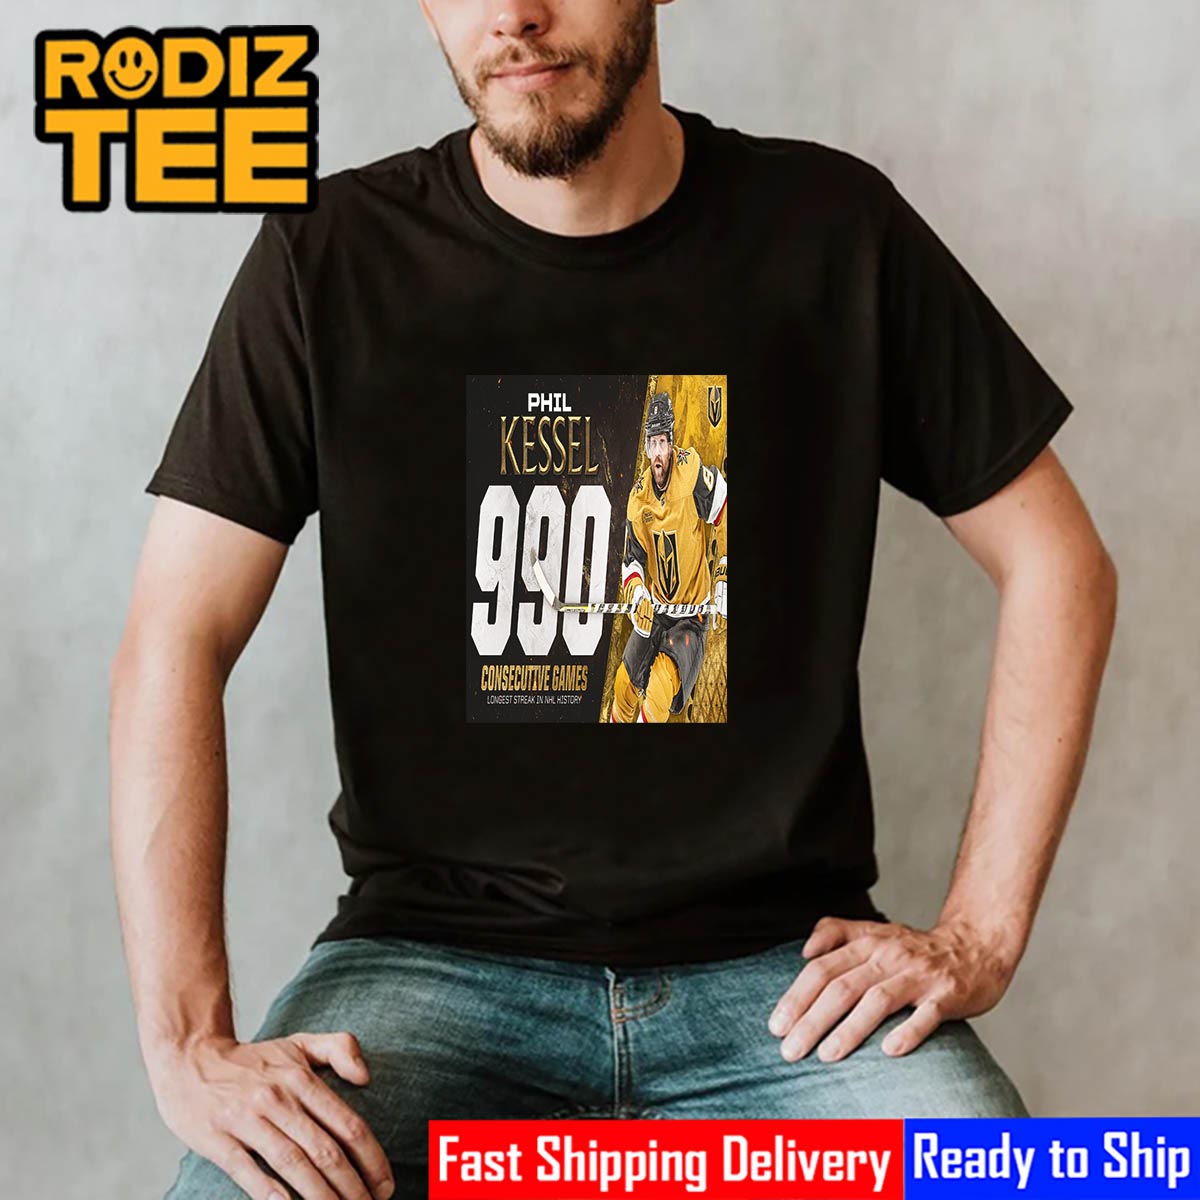 The NHL Iron Man Phil Kessel 990 Consecutive Games With Vegas Golden Knights Best T-Shirt